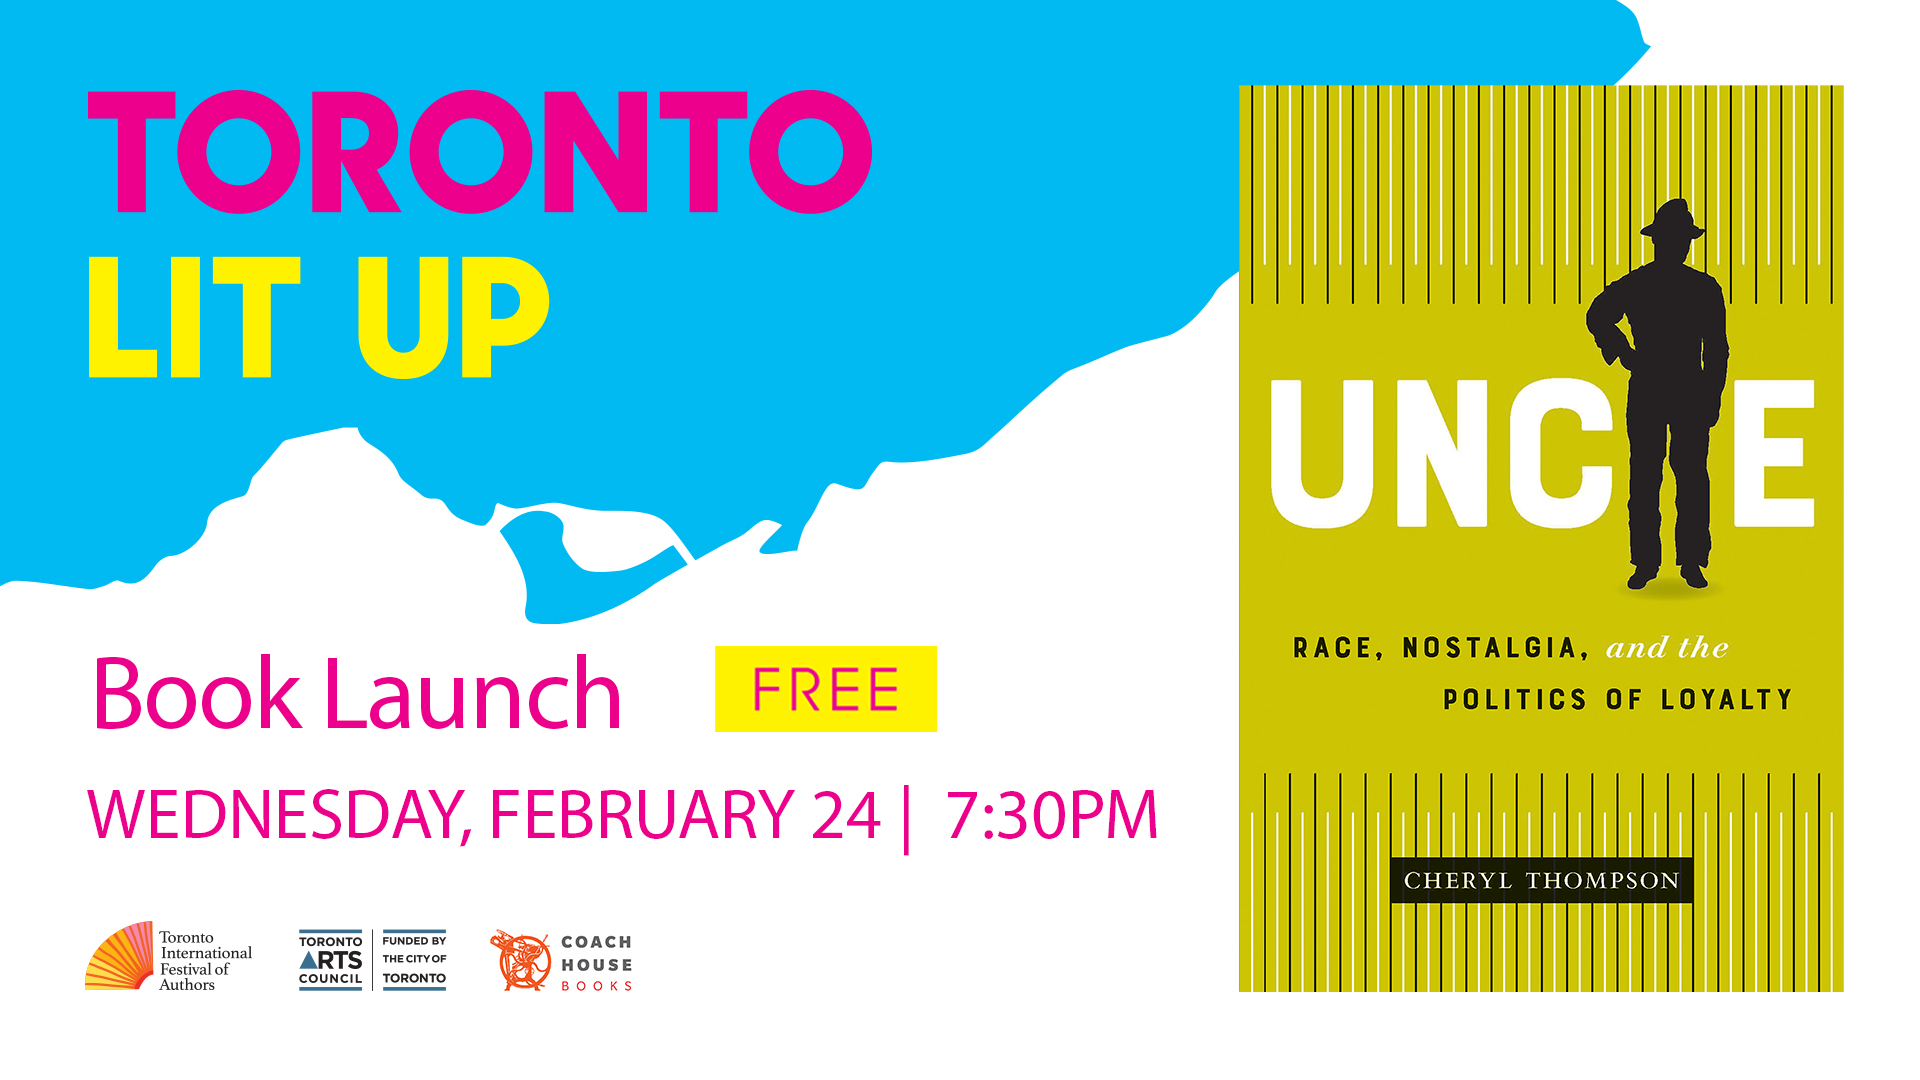 Toronto Lit Up Banner with Uncle book cover by Cheryl Thompson. Free Book Launch Wednesday, February 24 at 7:30pm